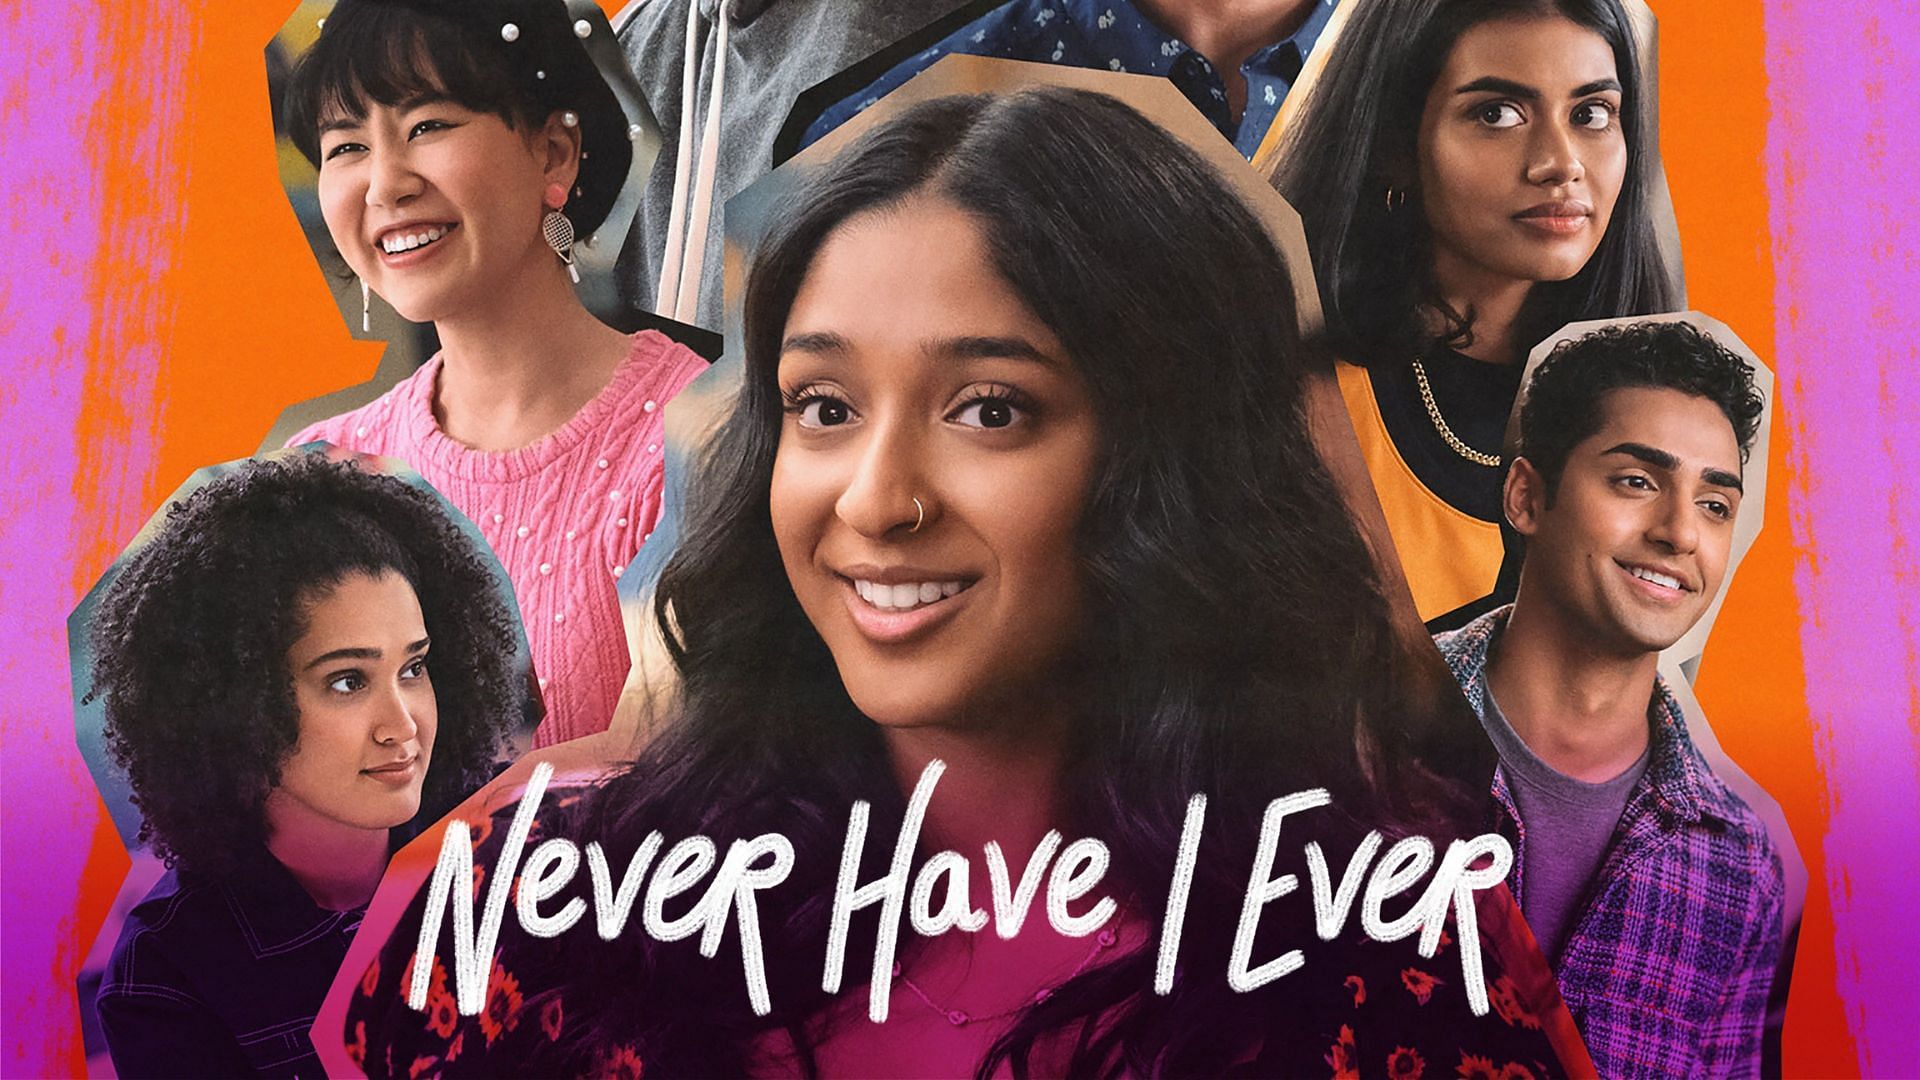 Never Have I Ever season 3 official poster (Image via Rotten Tomatoes)